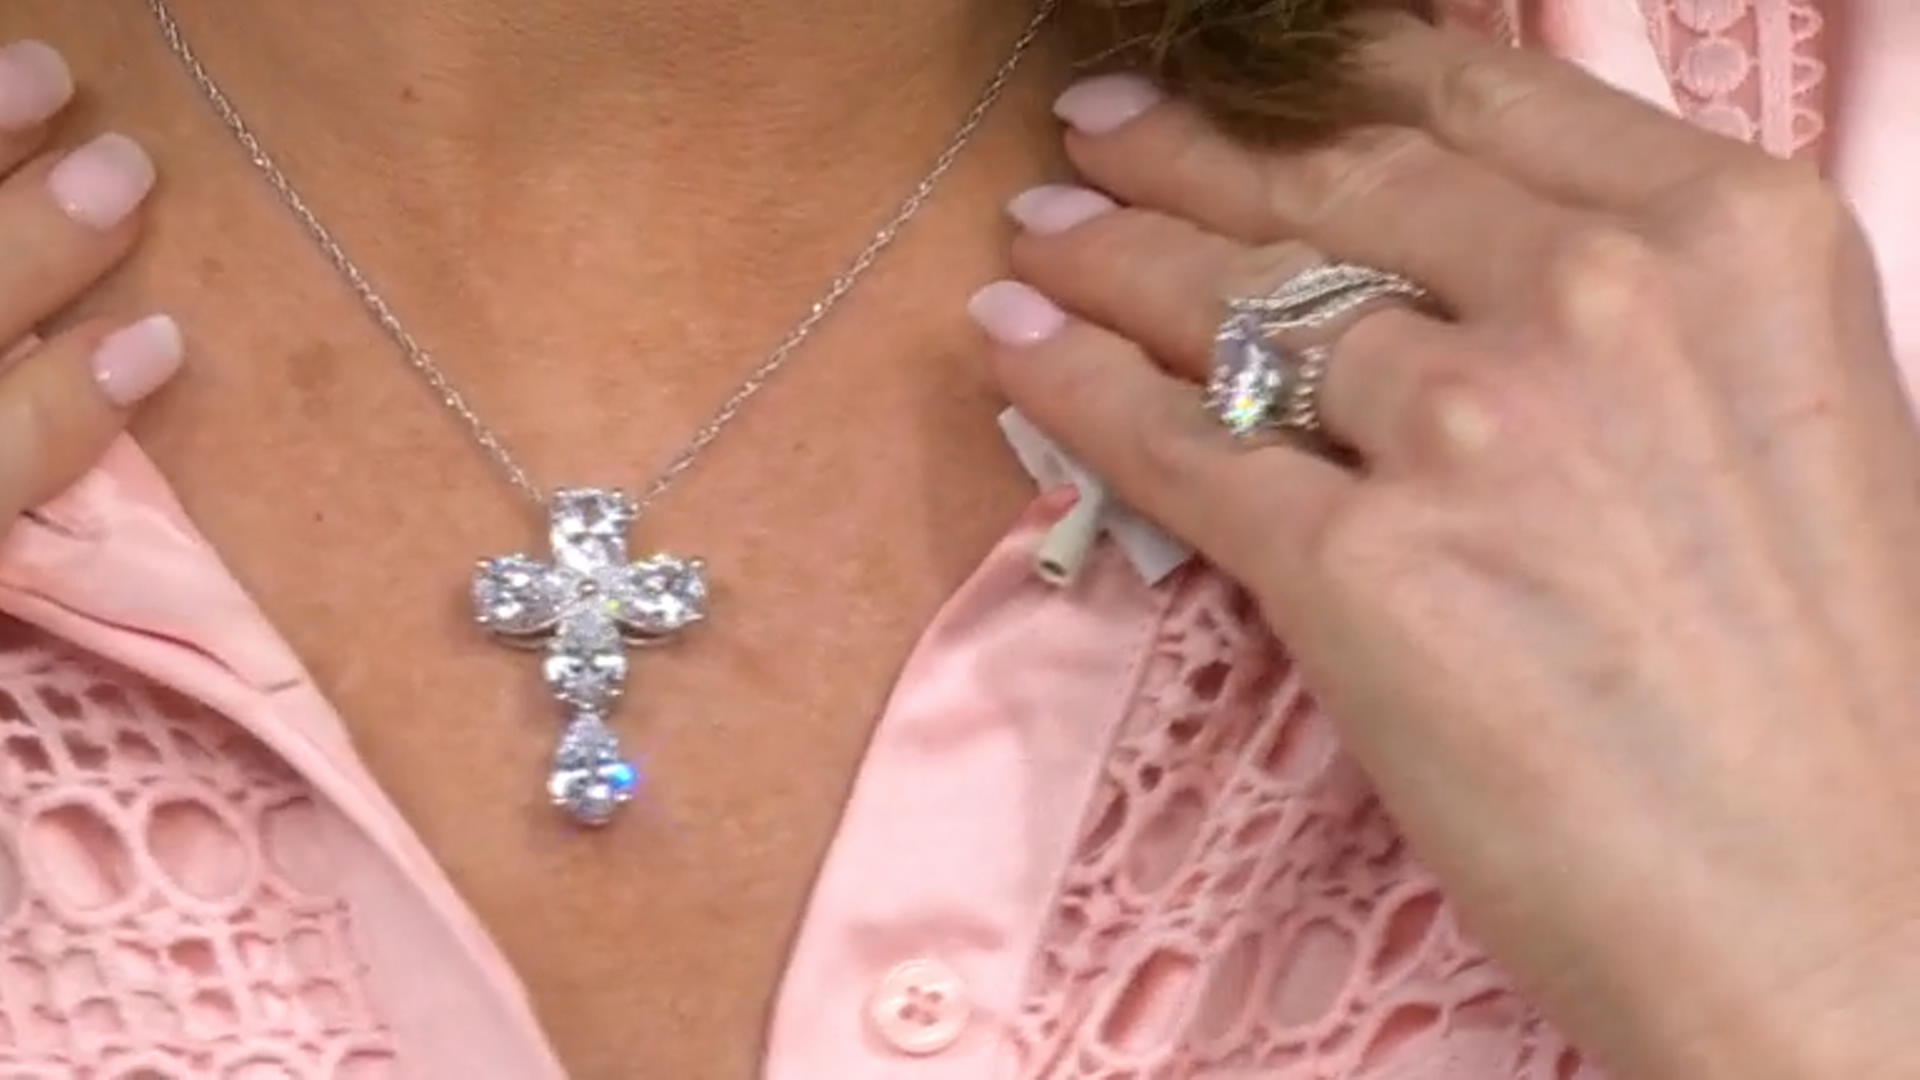 White Cubic Zirconia Rhodium Over Sterling Silver Cross Pendant With Chain 23.70ctw Video Thumbnail